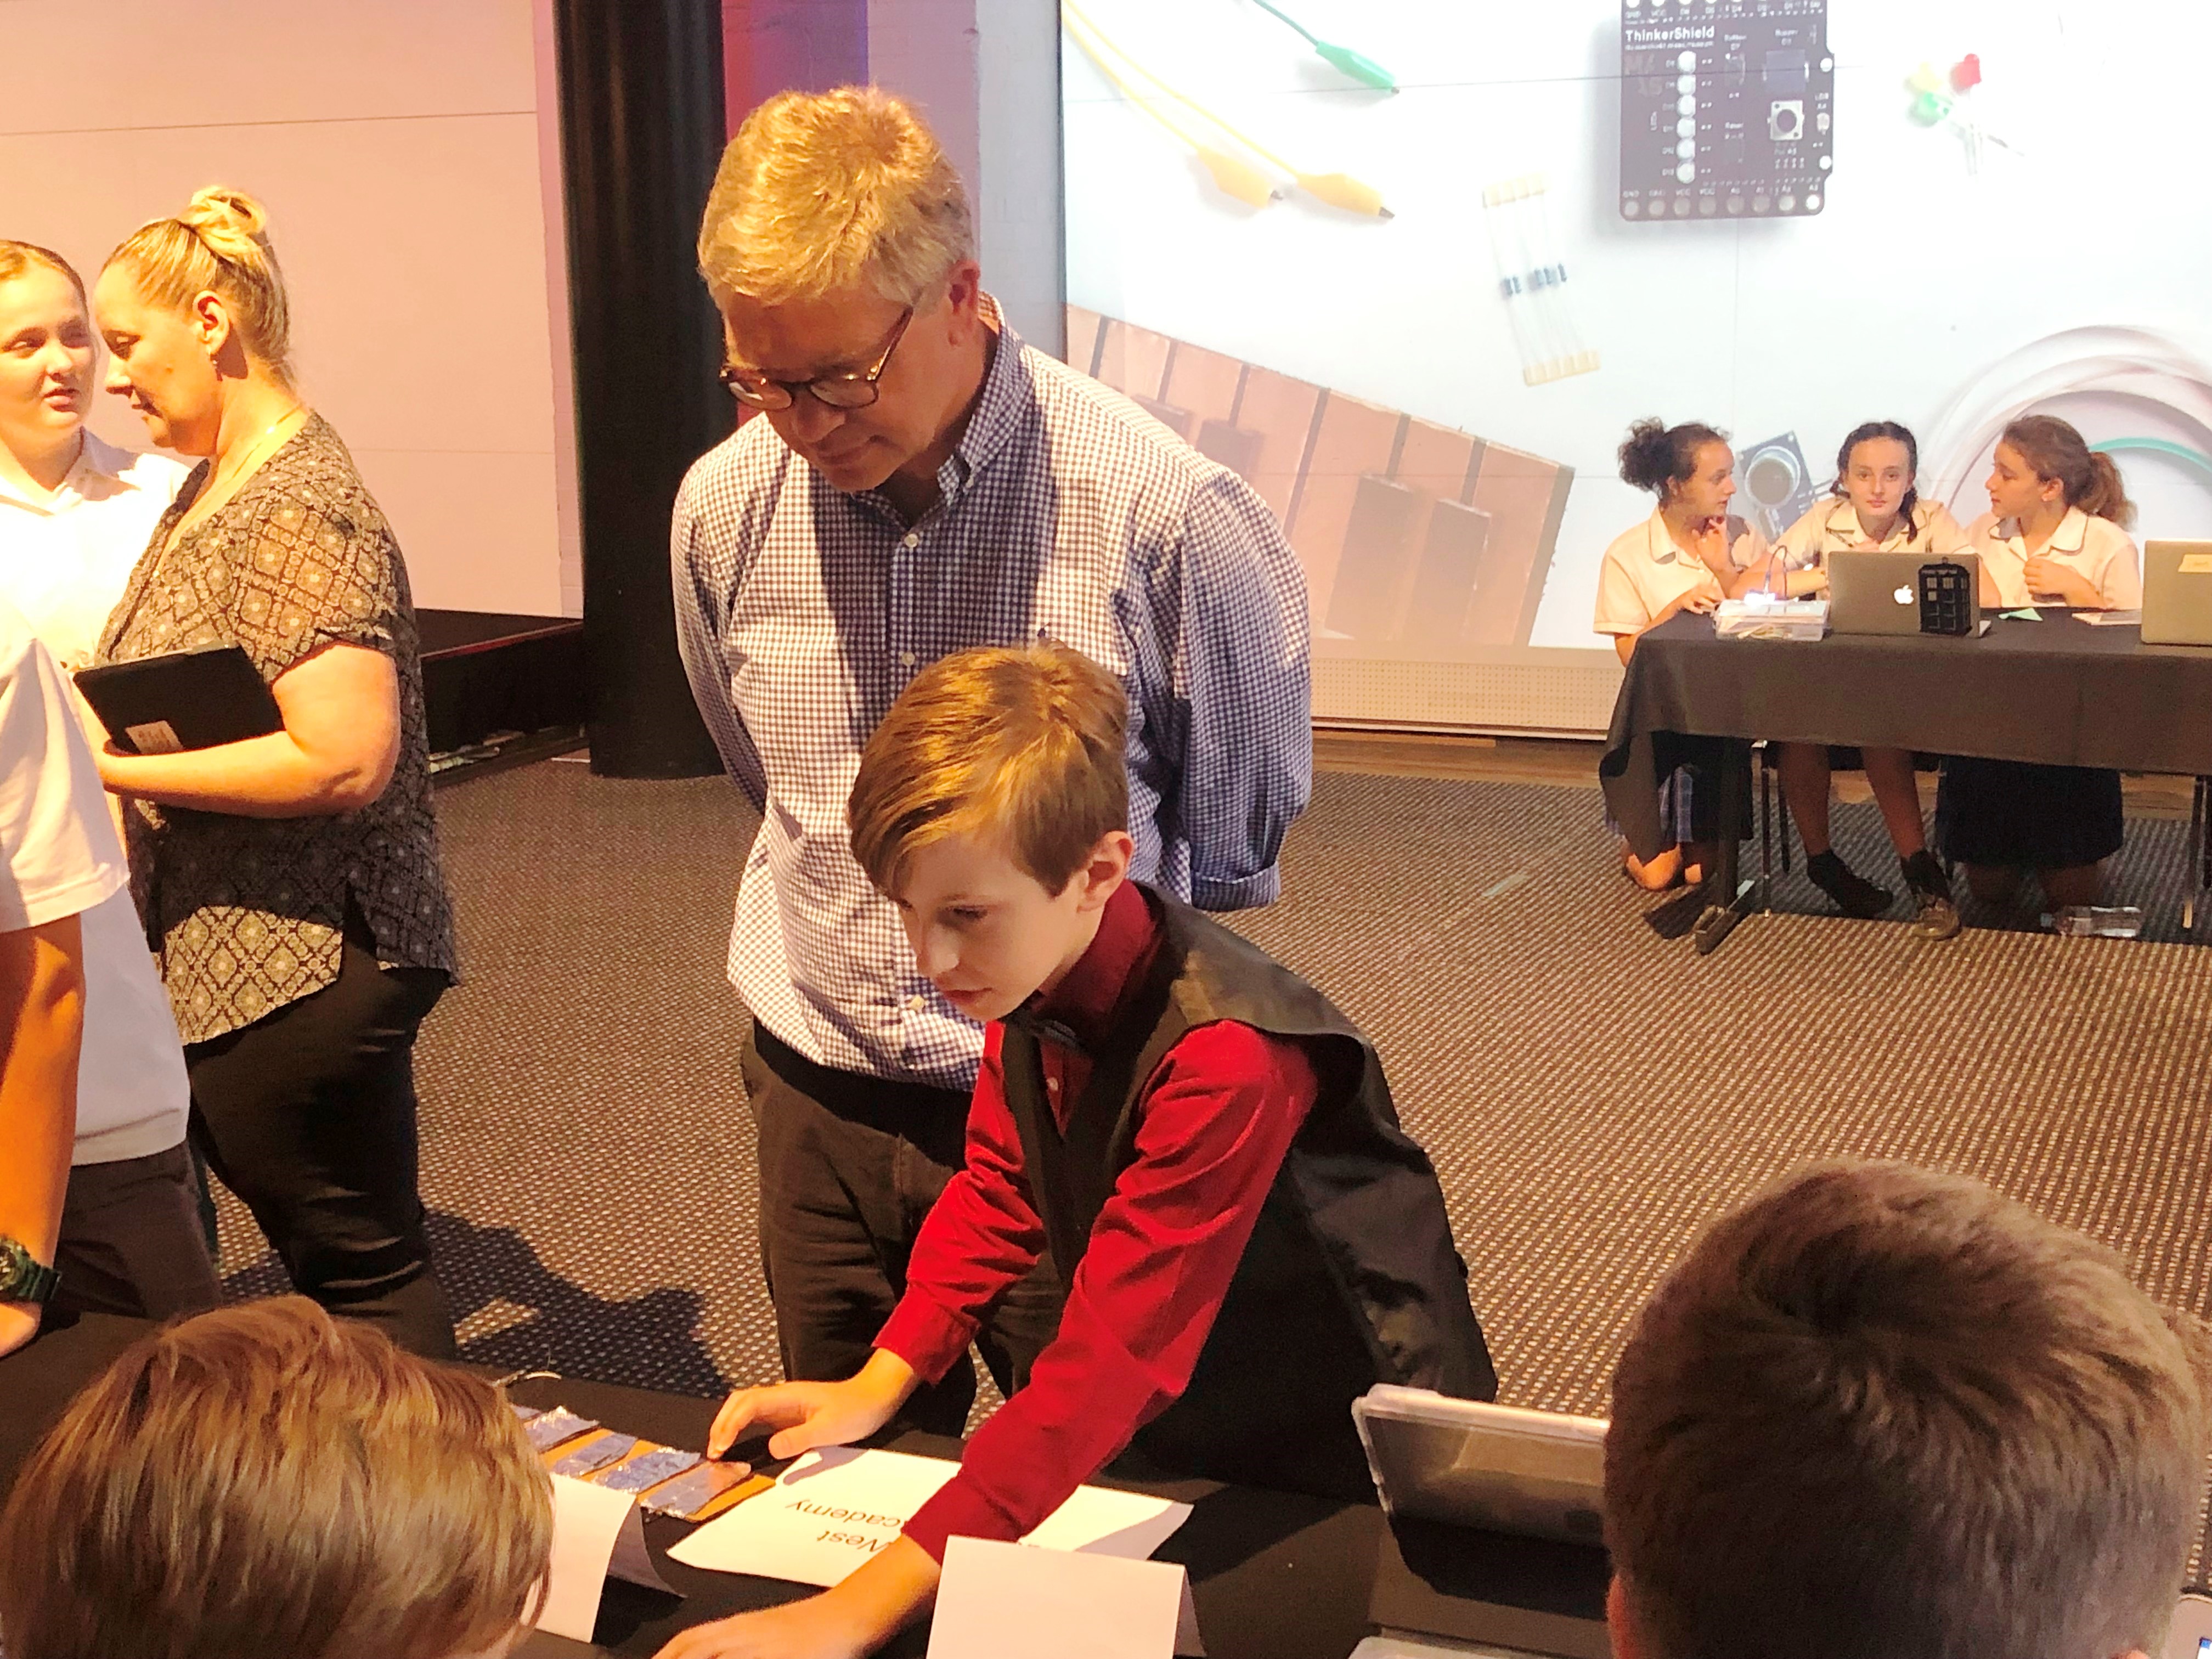 Professor Hugh Durrant-Whyte with student at the awards ceremony for the Premier's Coding Challenge, 18 December 2018